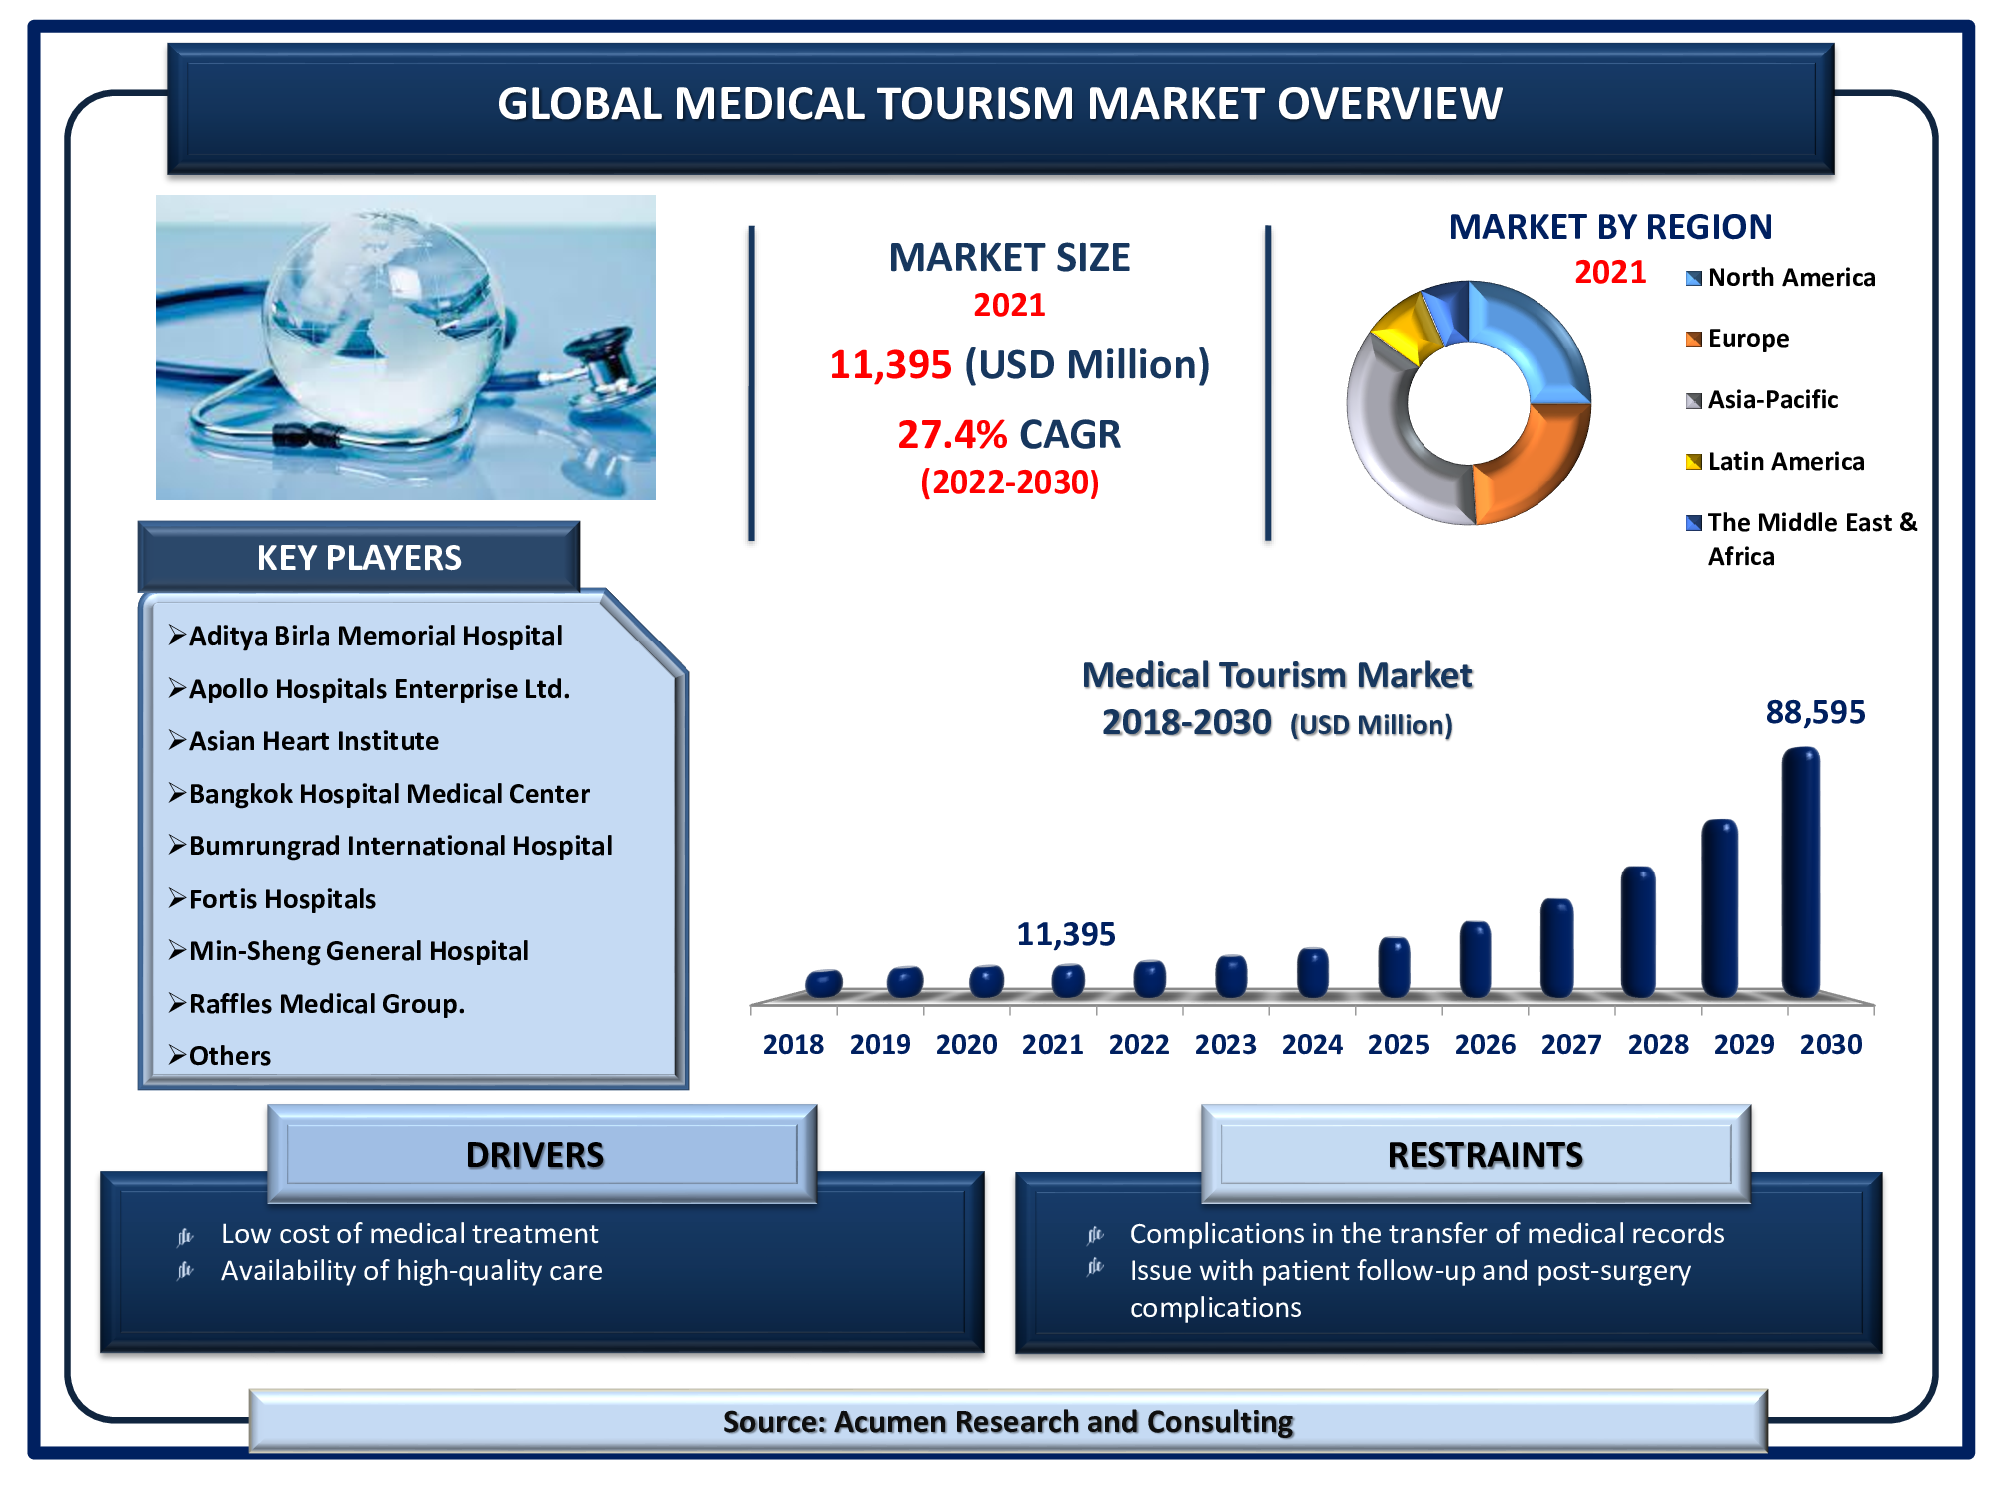 The Global Medical Tourism Market Size is valued at USD 11,395 million in 2021 and is estimated to achieve a market size of USD 88,595 million by 2030; growing at a CAGR of 27.4%.